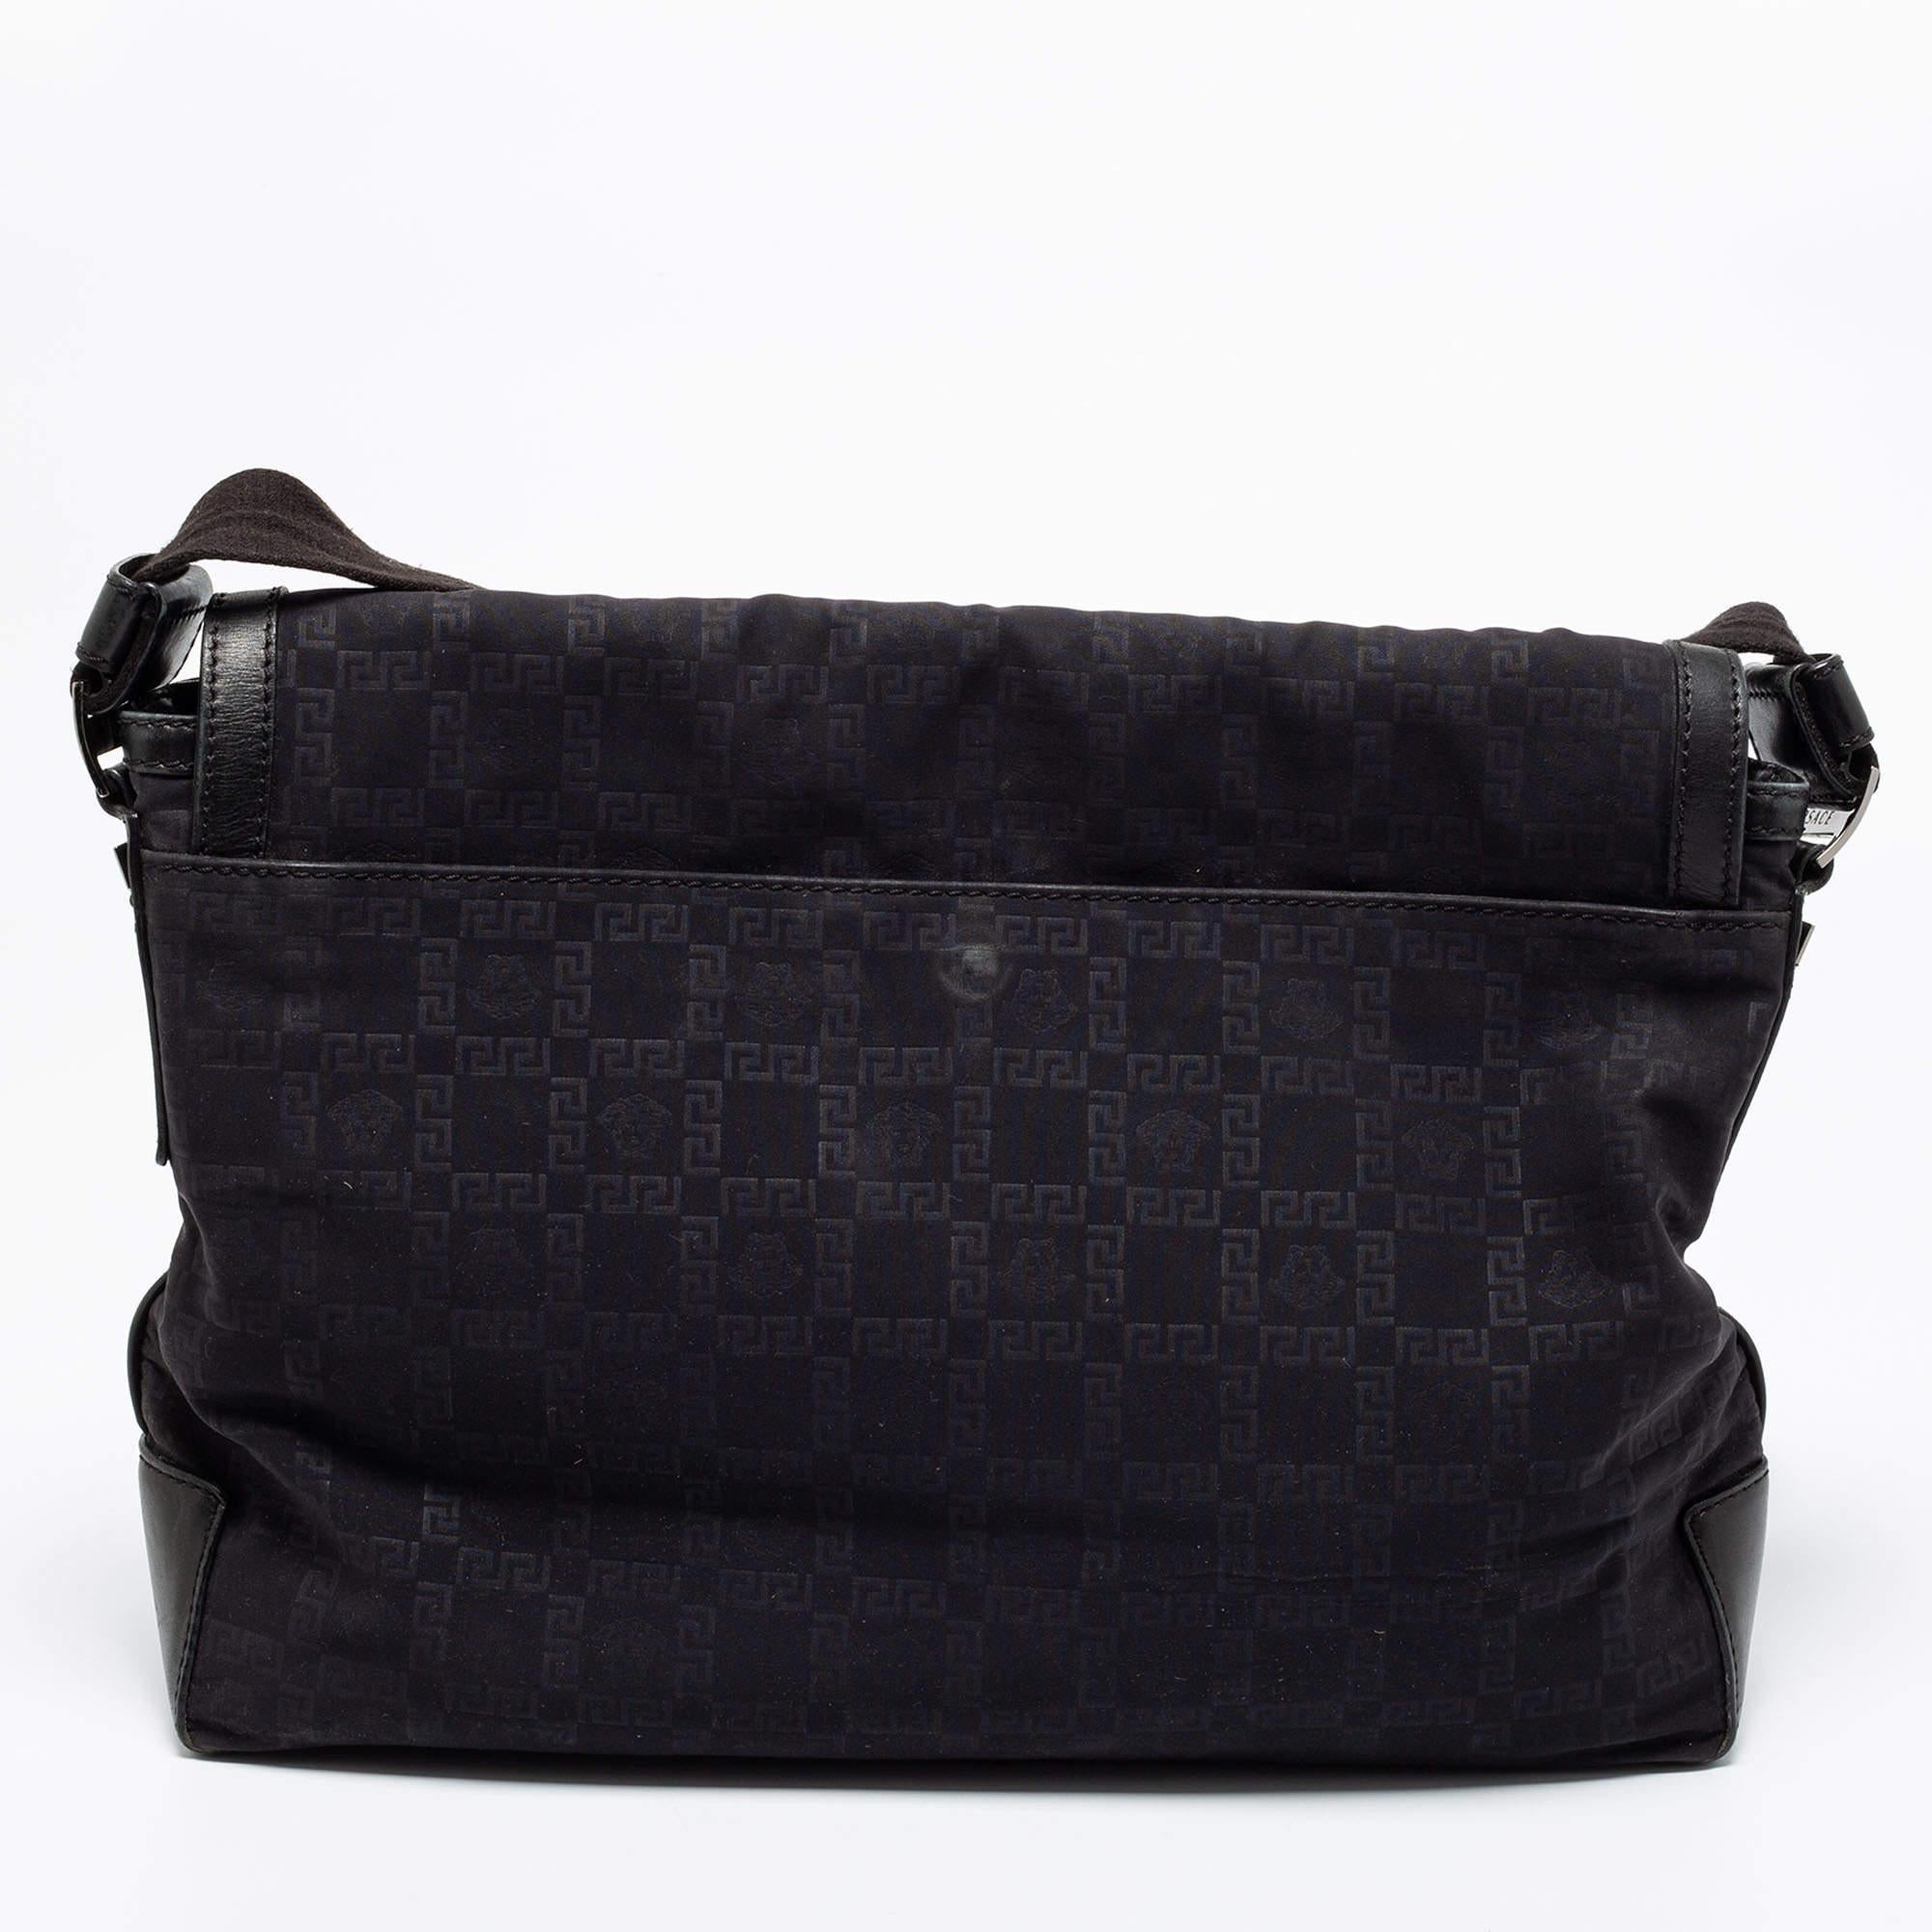 An accessory of practical style, this black Versace bag will be a super useful accessory for traveling or running daily errands. It is crafted from signature nylon and features a leather base, a long shoulder strap, and a spacious compartment. You